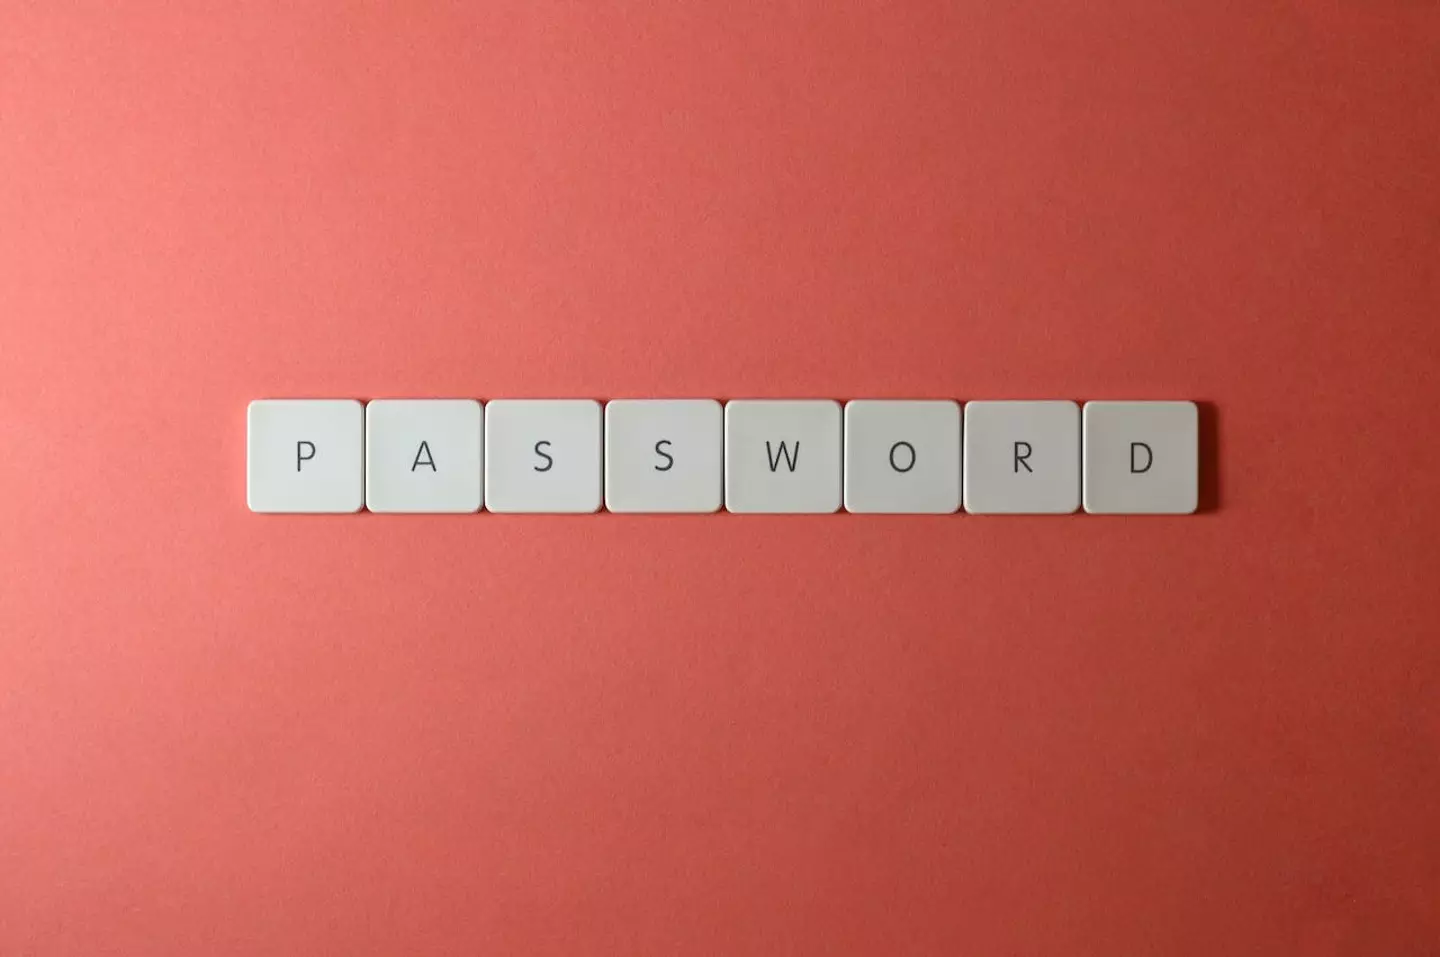 Sorry but if your password is actually 'password' you deserve to be hacked.